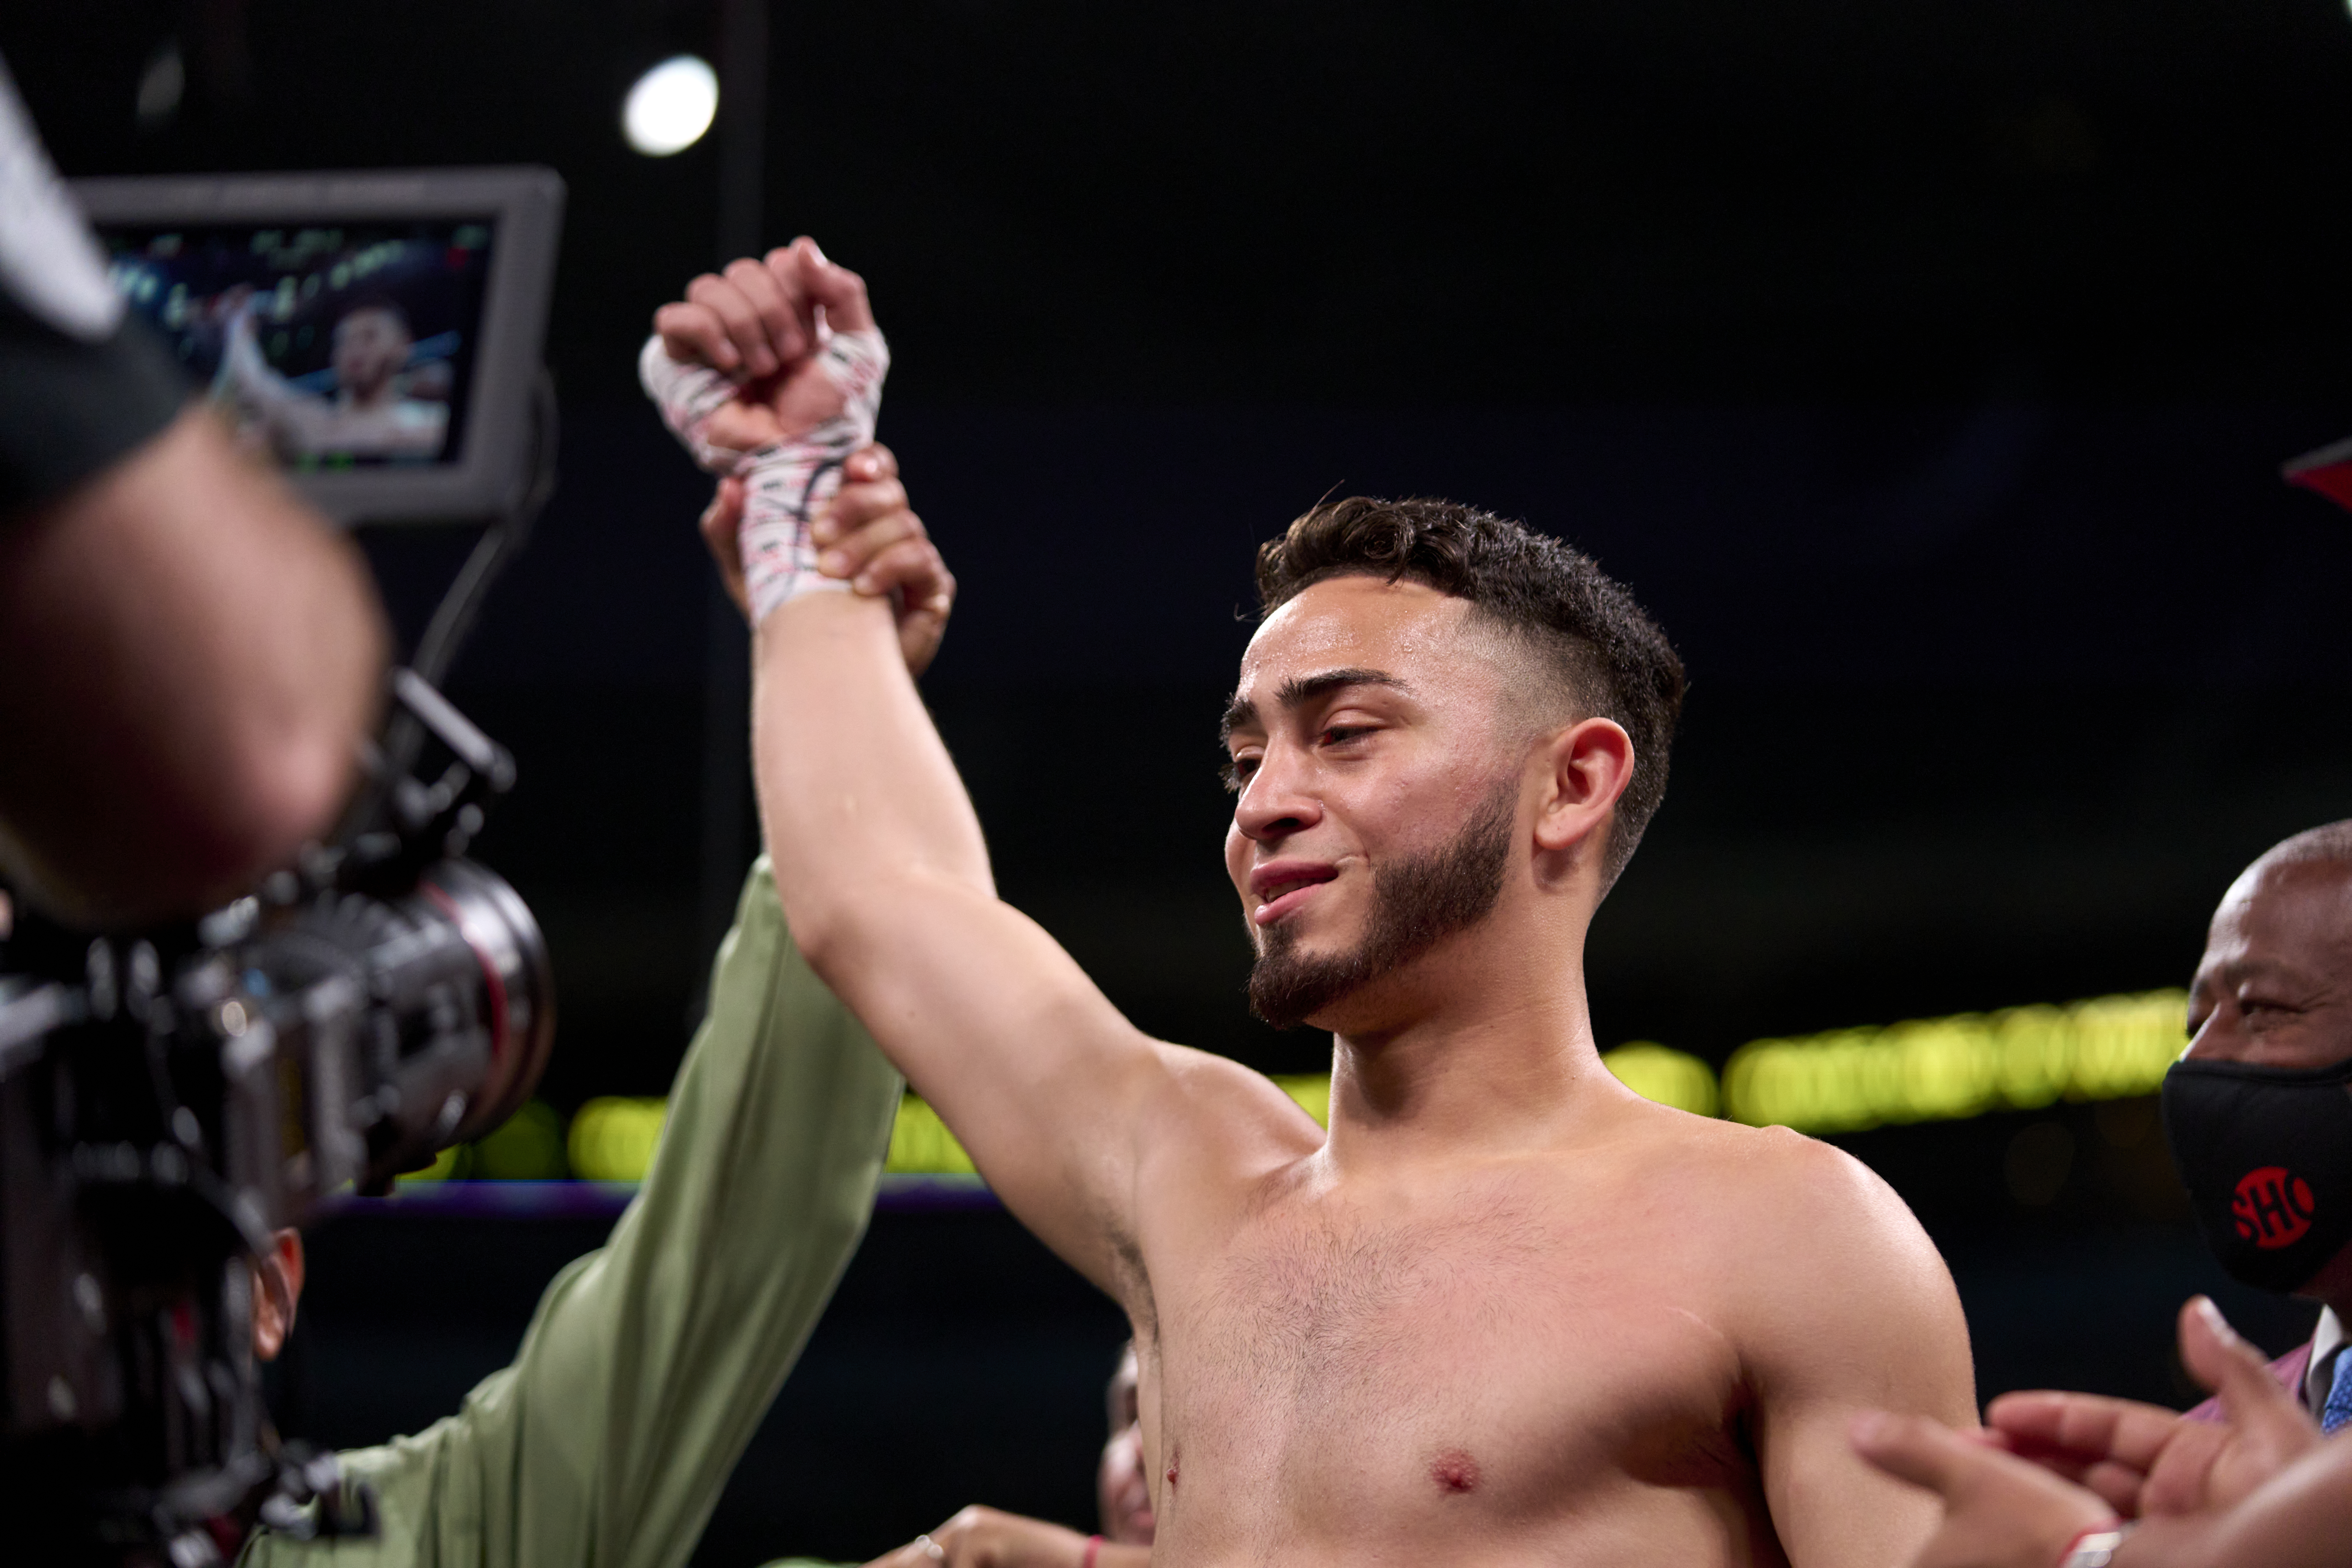 Jose Valenzuela credits David Benavidez’s defensive ability in the pocket as being an overlooked skill.